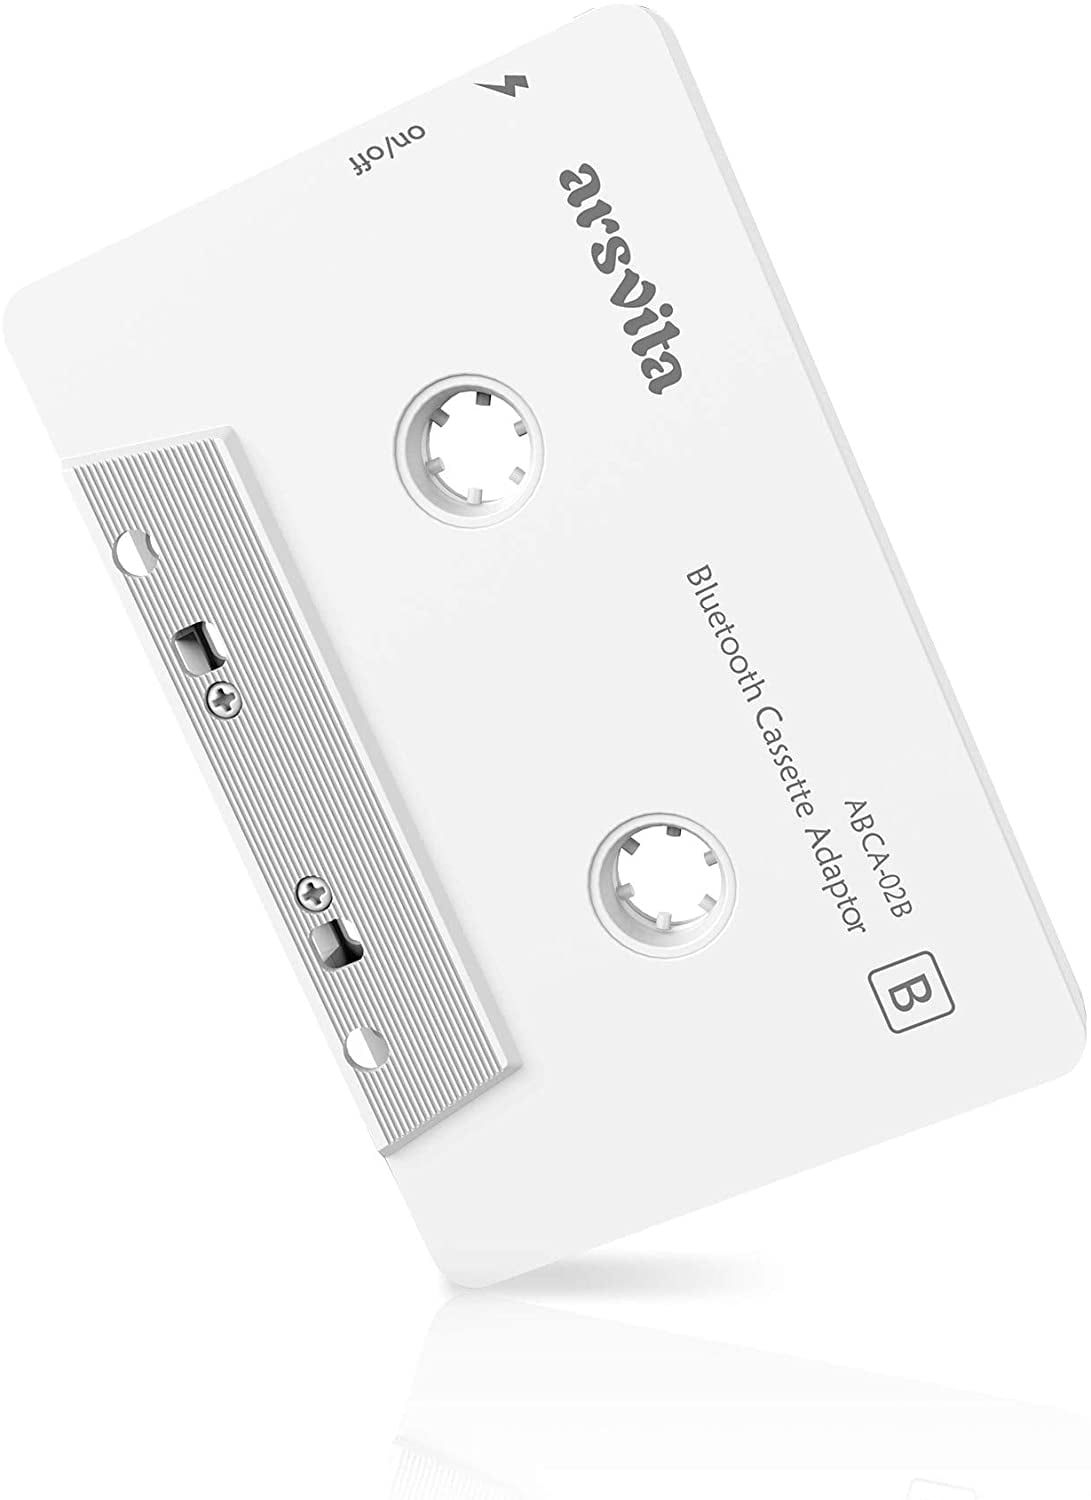 Cicmod Car Audio Cassette Adapter Tape Aux Receiver Bt 5.0 For Iphone Ipod  Android White Prices, Shop Deals Online